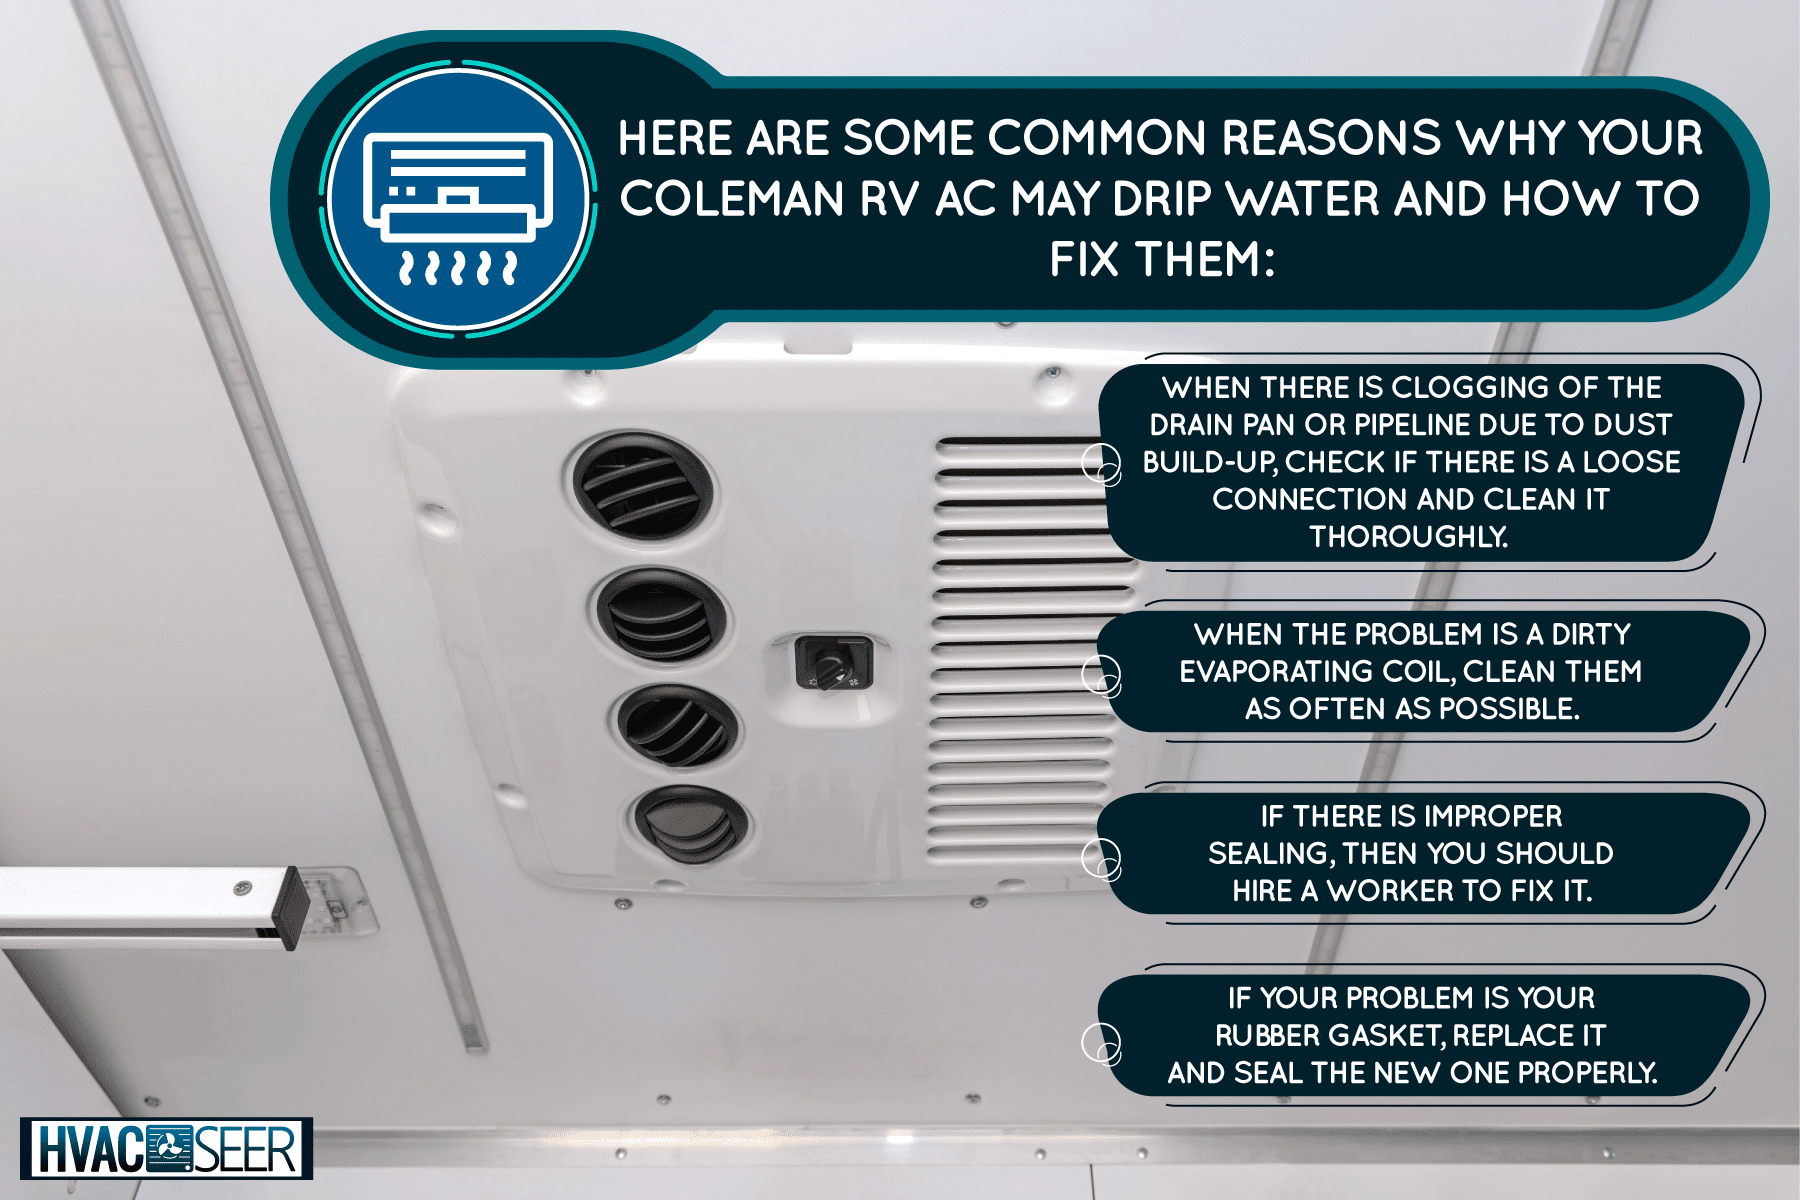 A central air conditioning unit of an RV, Coleman RV AC Dripping Water Inside - Why And What To Do?